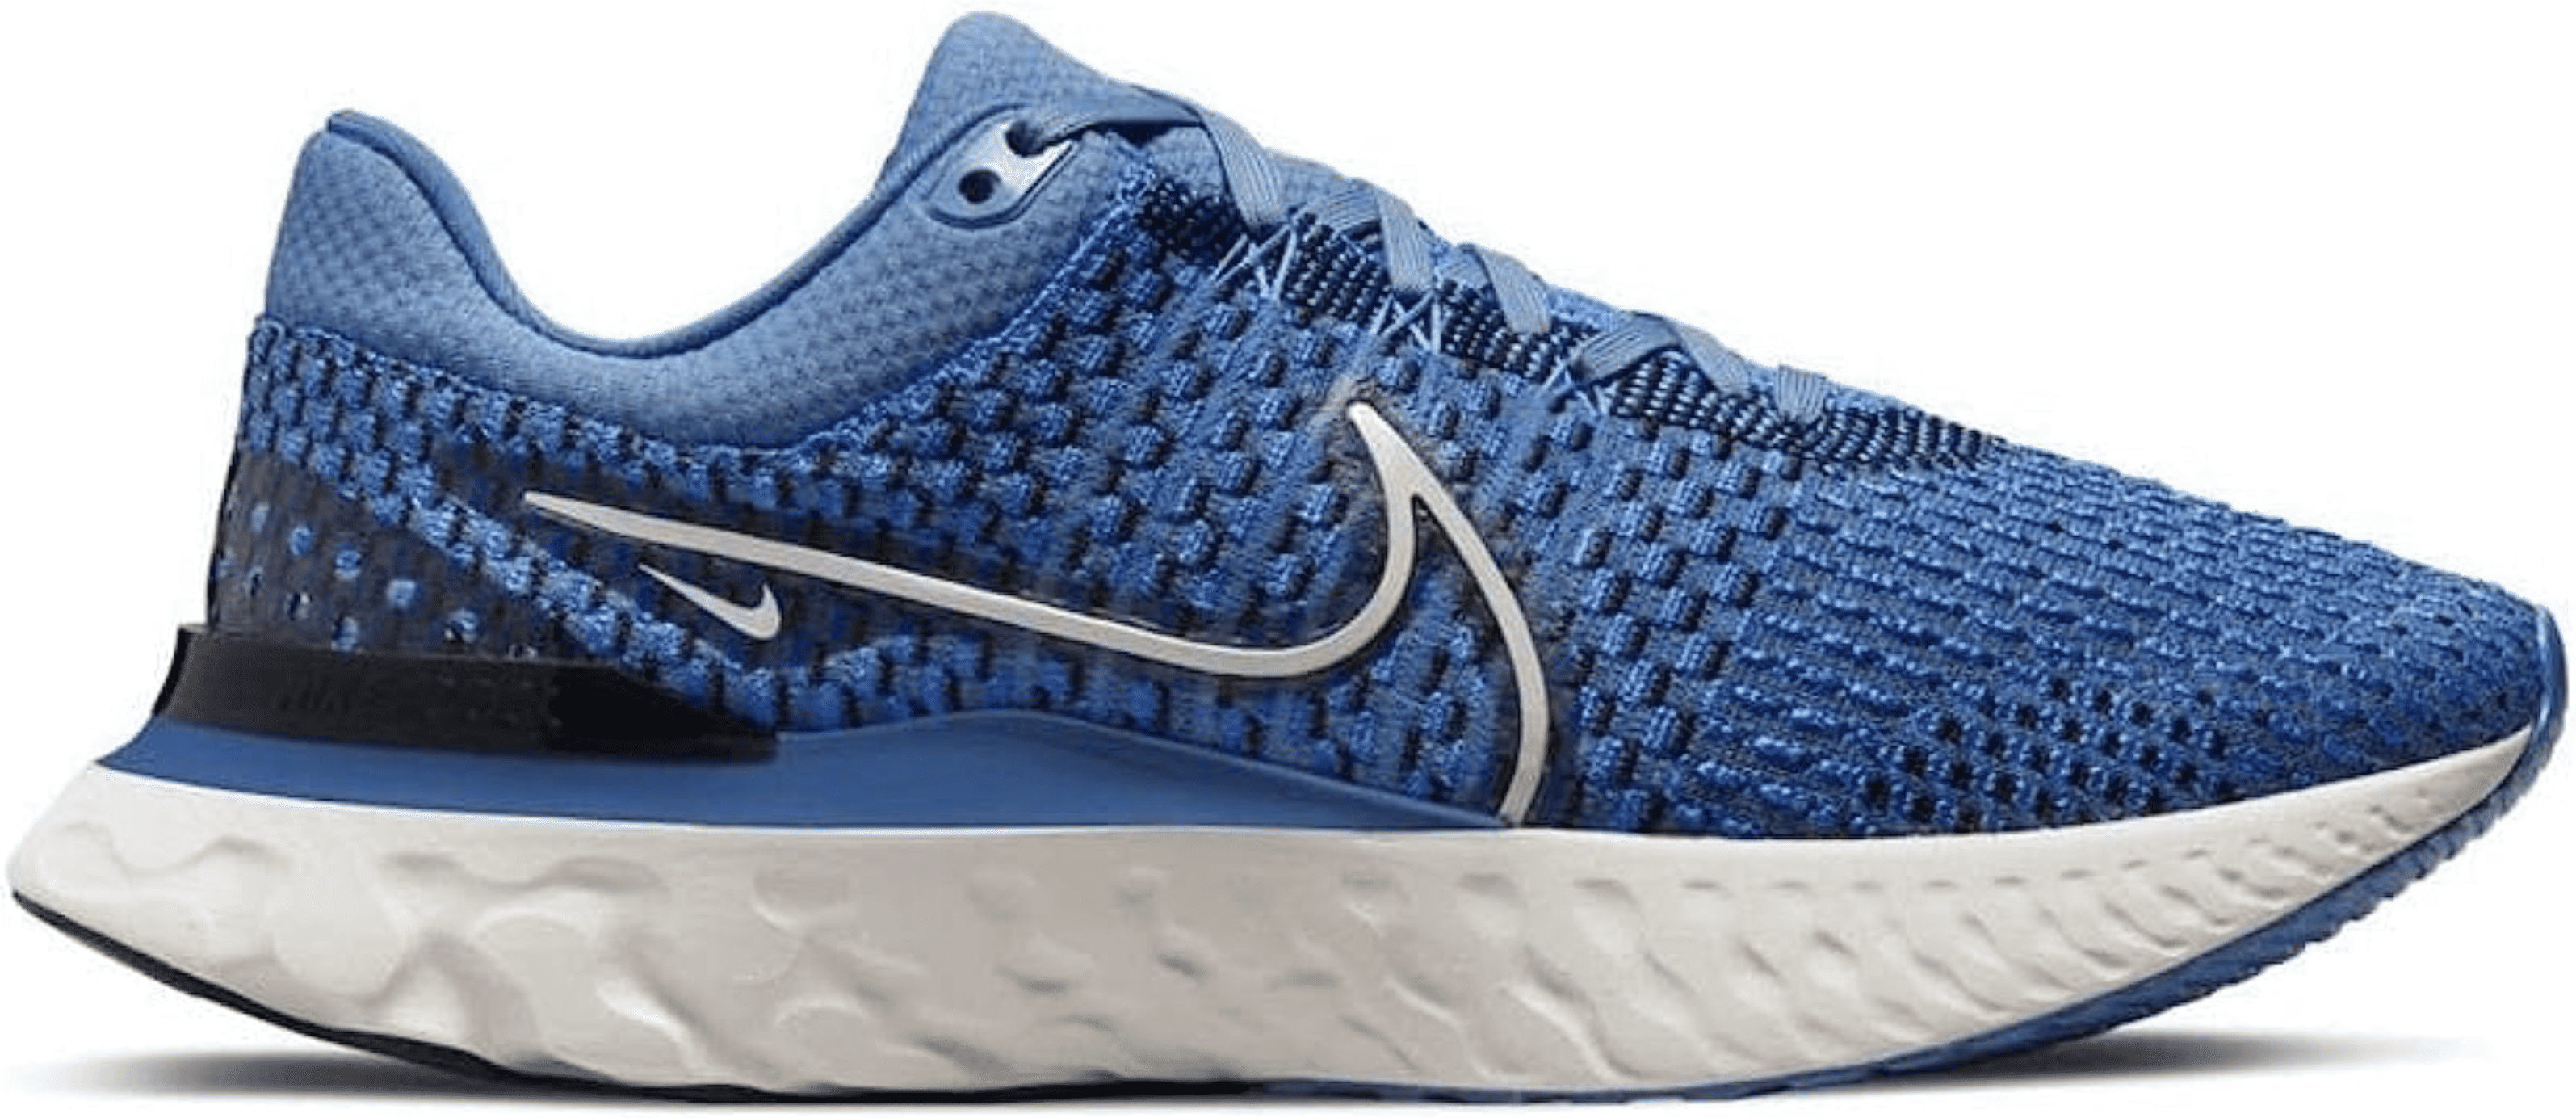 Best Nike for Flat Feet in 2023 recommended by a Foot Specialist